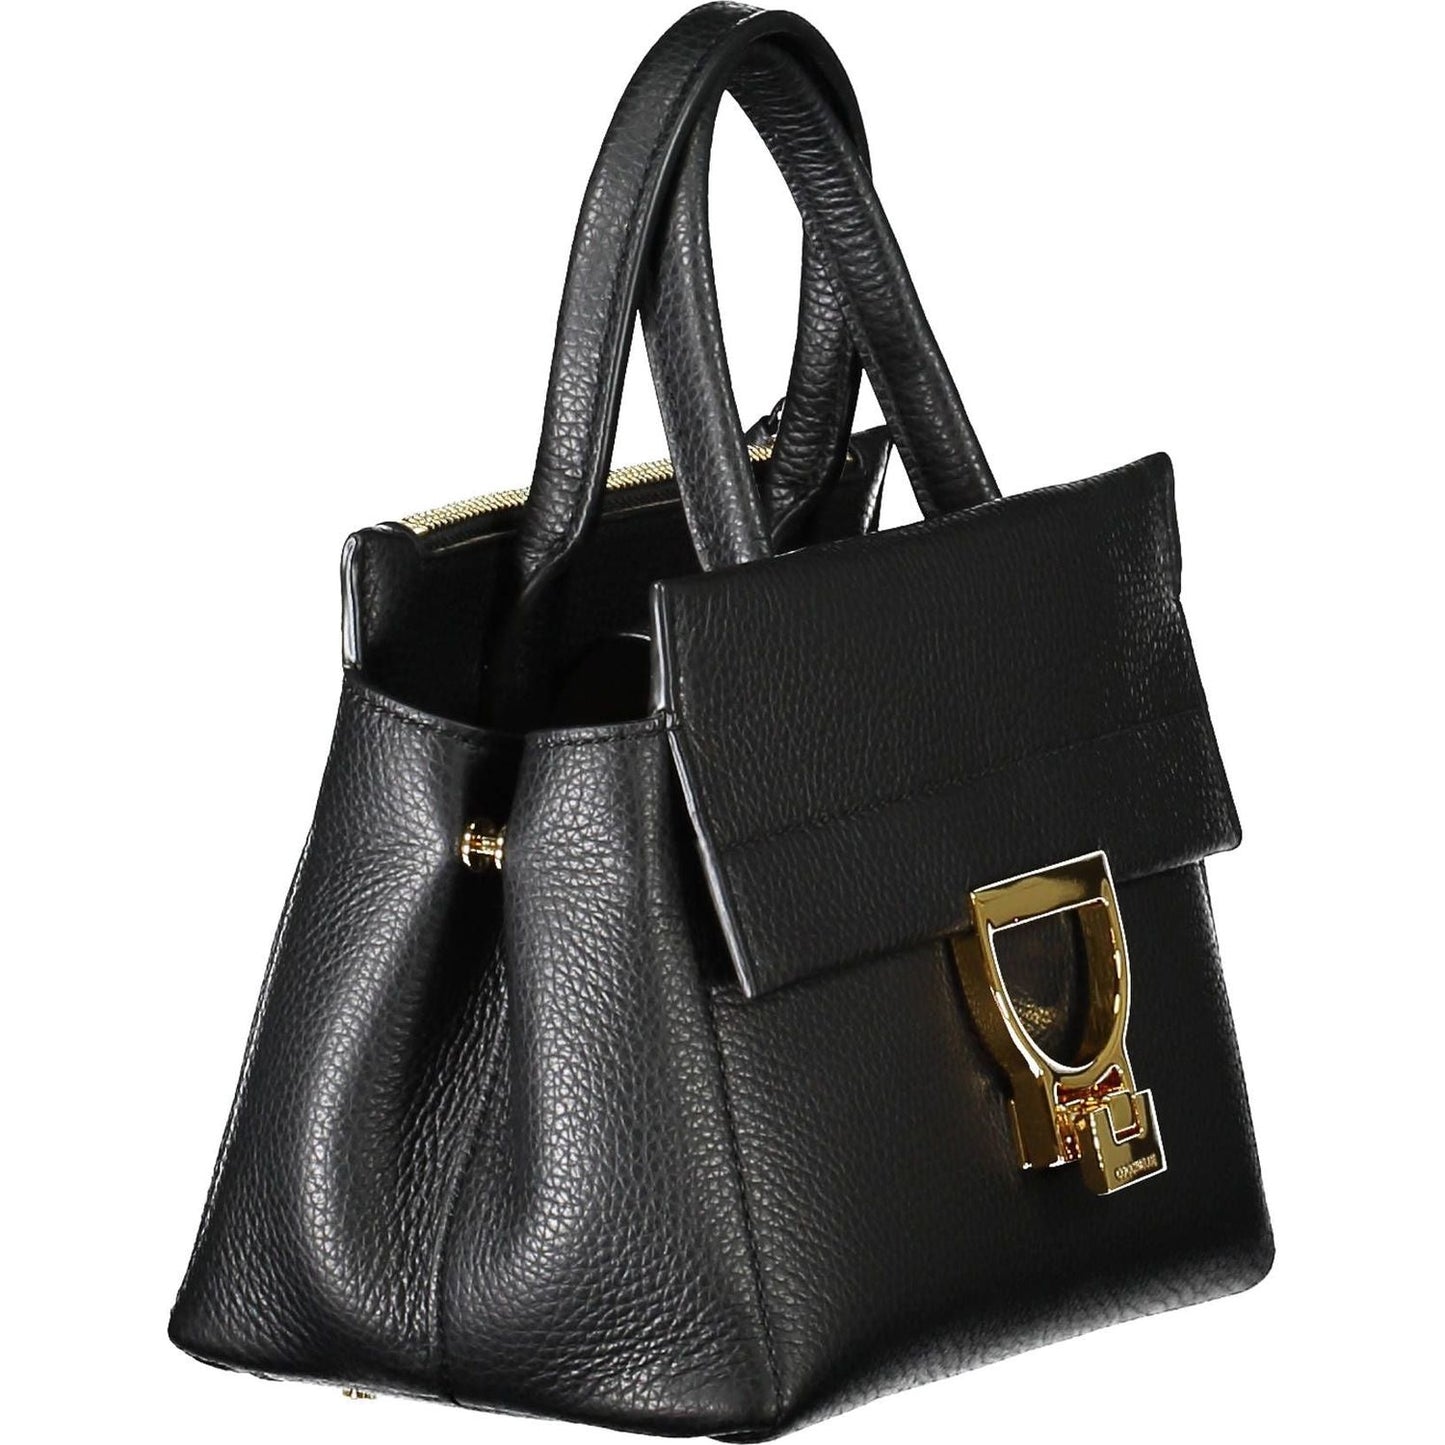 Coccinelle Chic Black Leather Handbag with Versatile Straps chic-black-leather-handbag-with-versatile-straps